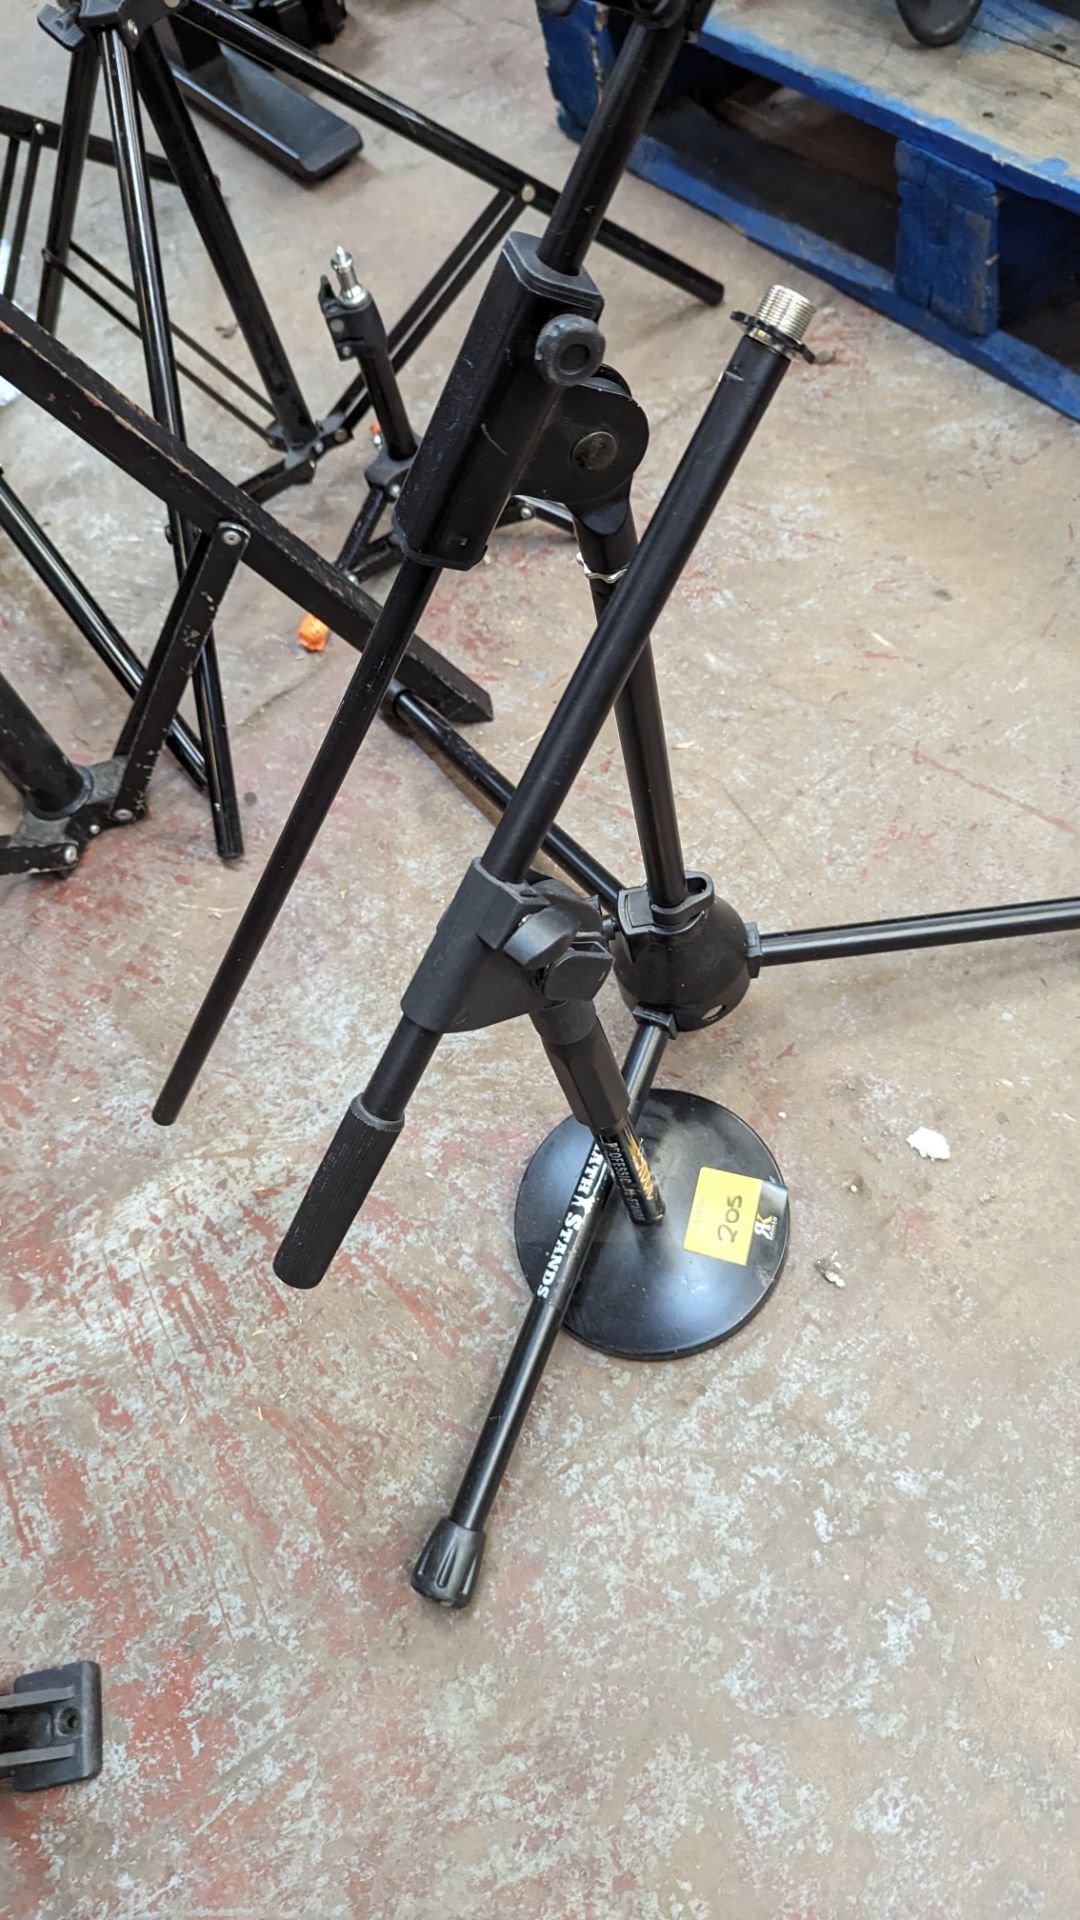 2 off mic stands plus pop shield - Image 6 of 7